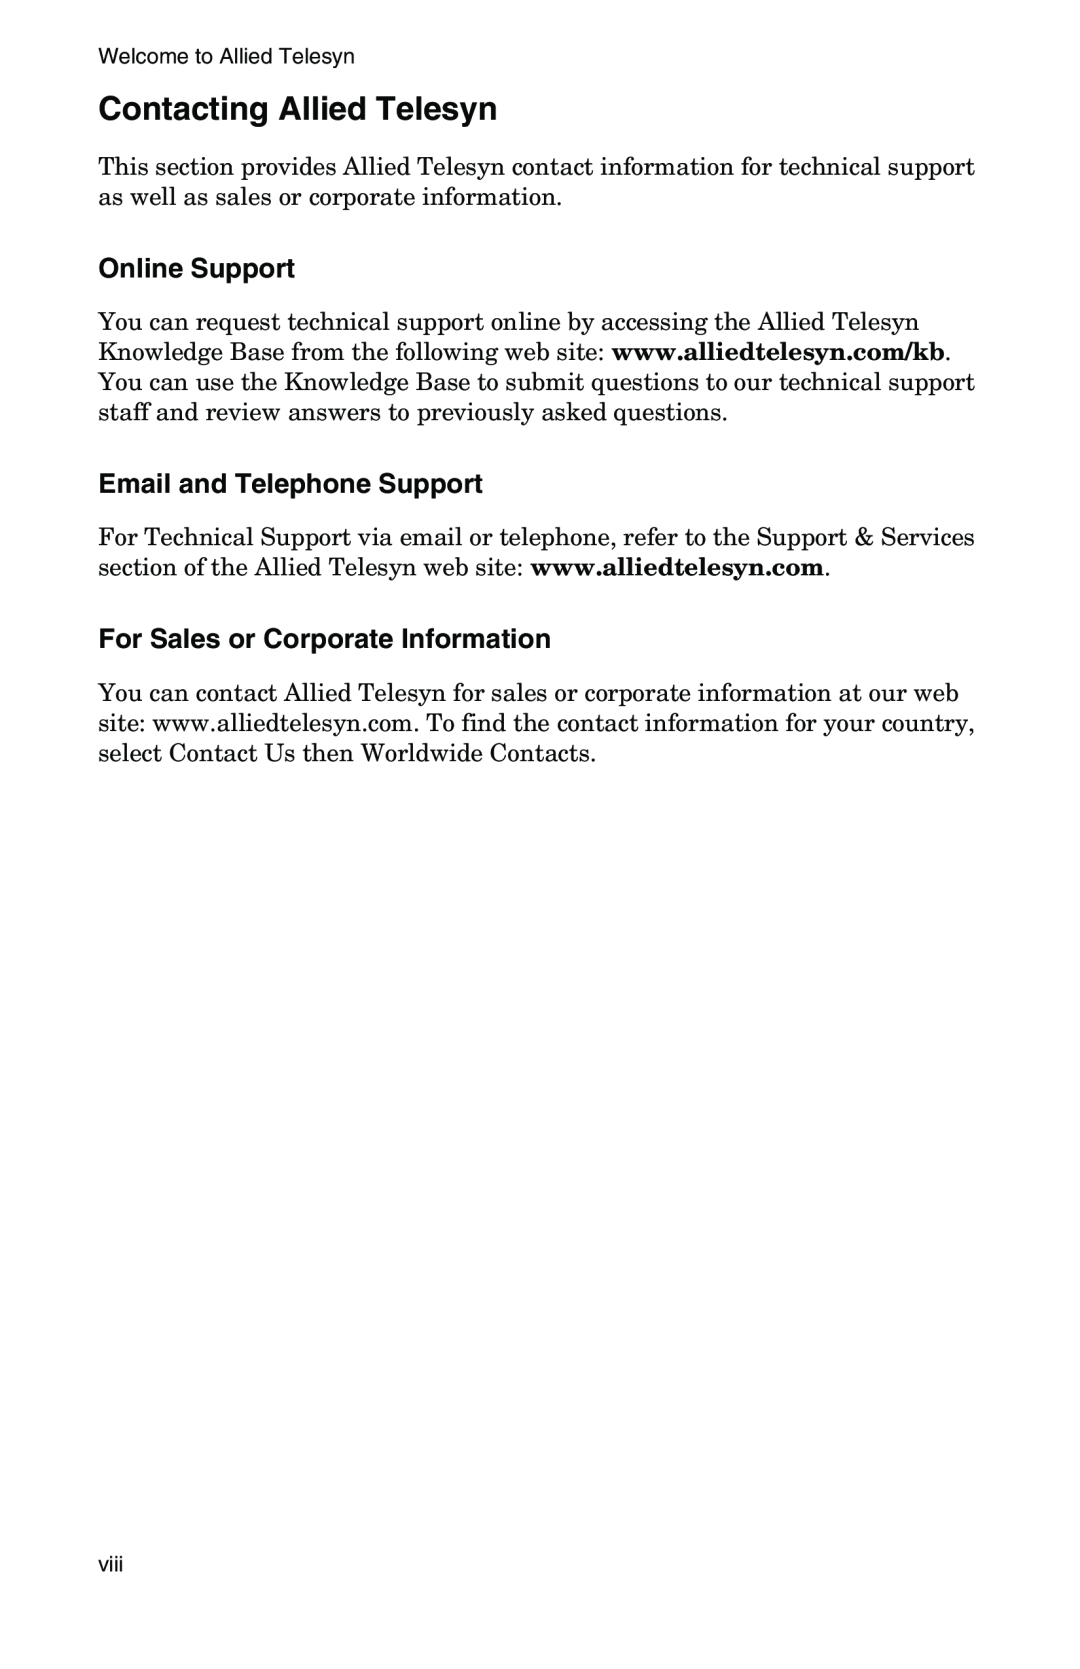 IBM AT-FS202SC/FS1, AT-FS202SC/FS2, AT-FS202SC/FS4 Contacting Allied Telesyn, Online Support, Email and Telephone Support 